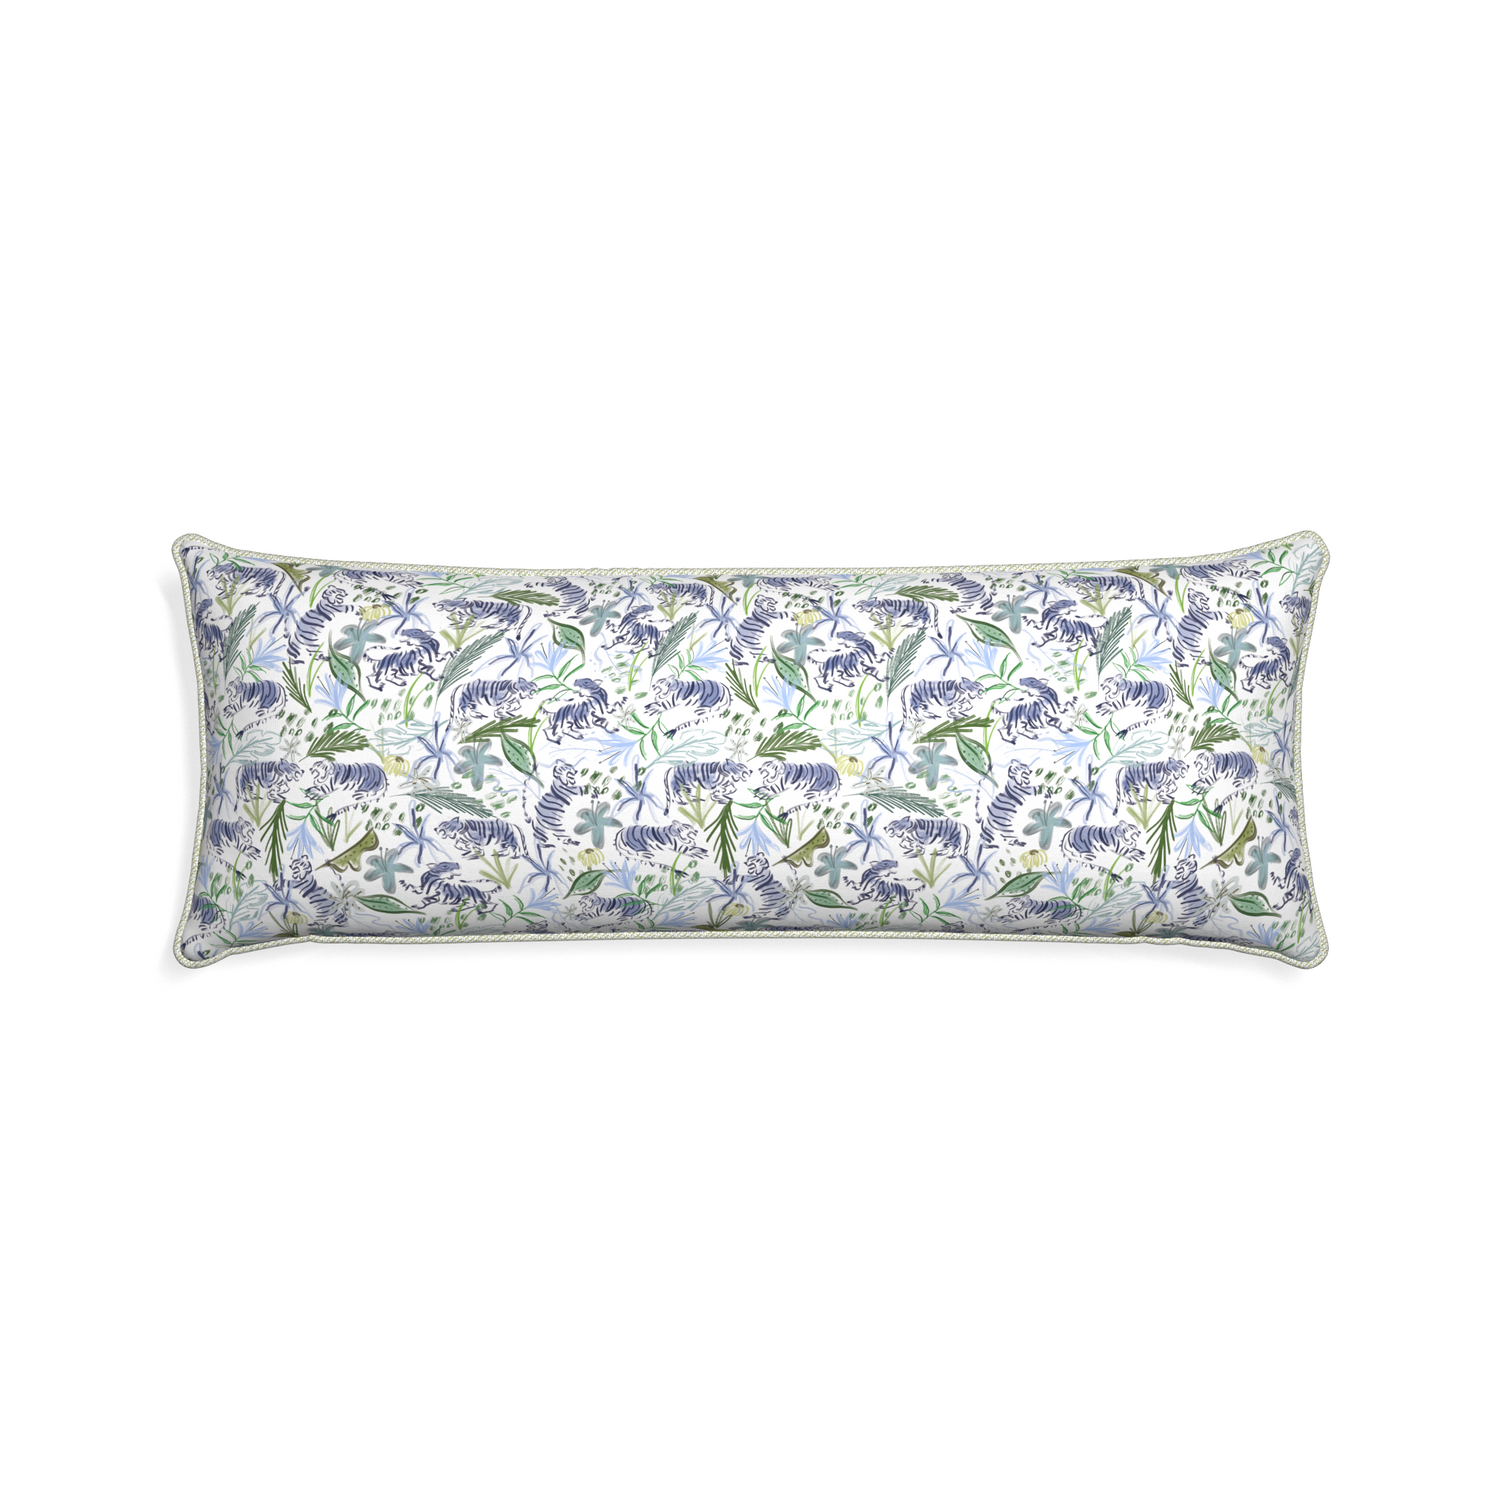 Xl-lumbar frida green custom pillow with l piping on white background